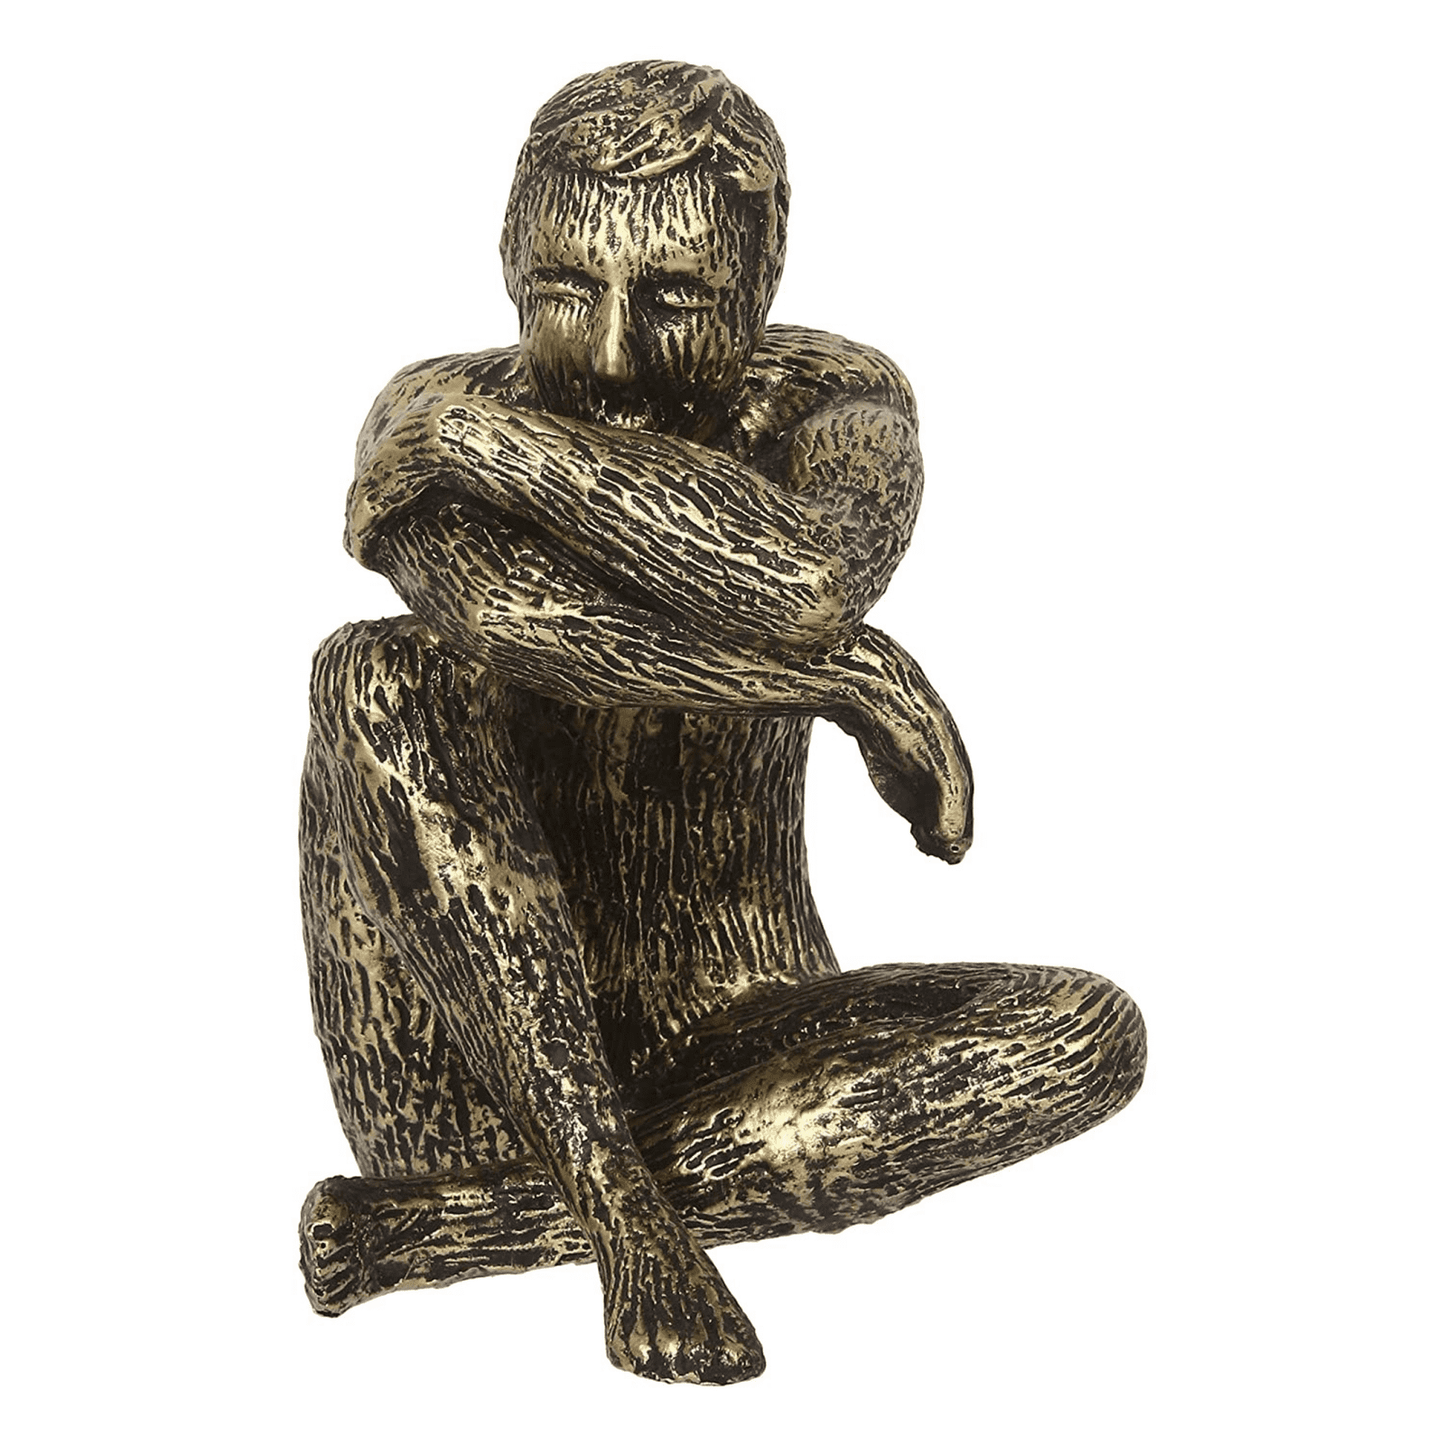 Buy Thinking Men Statue for Decoration